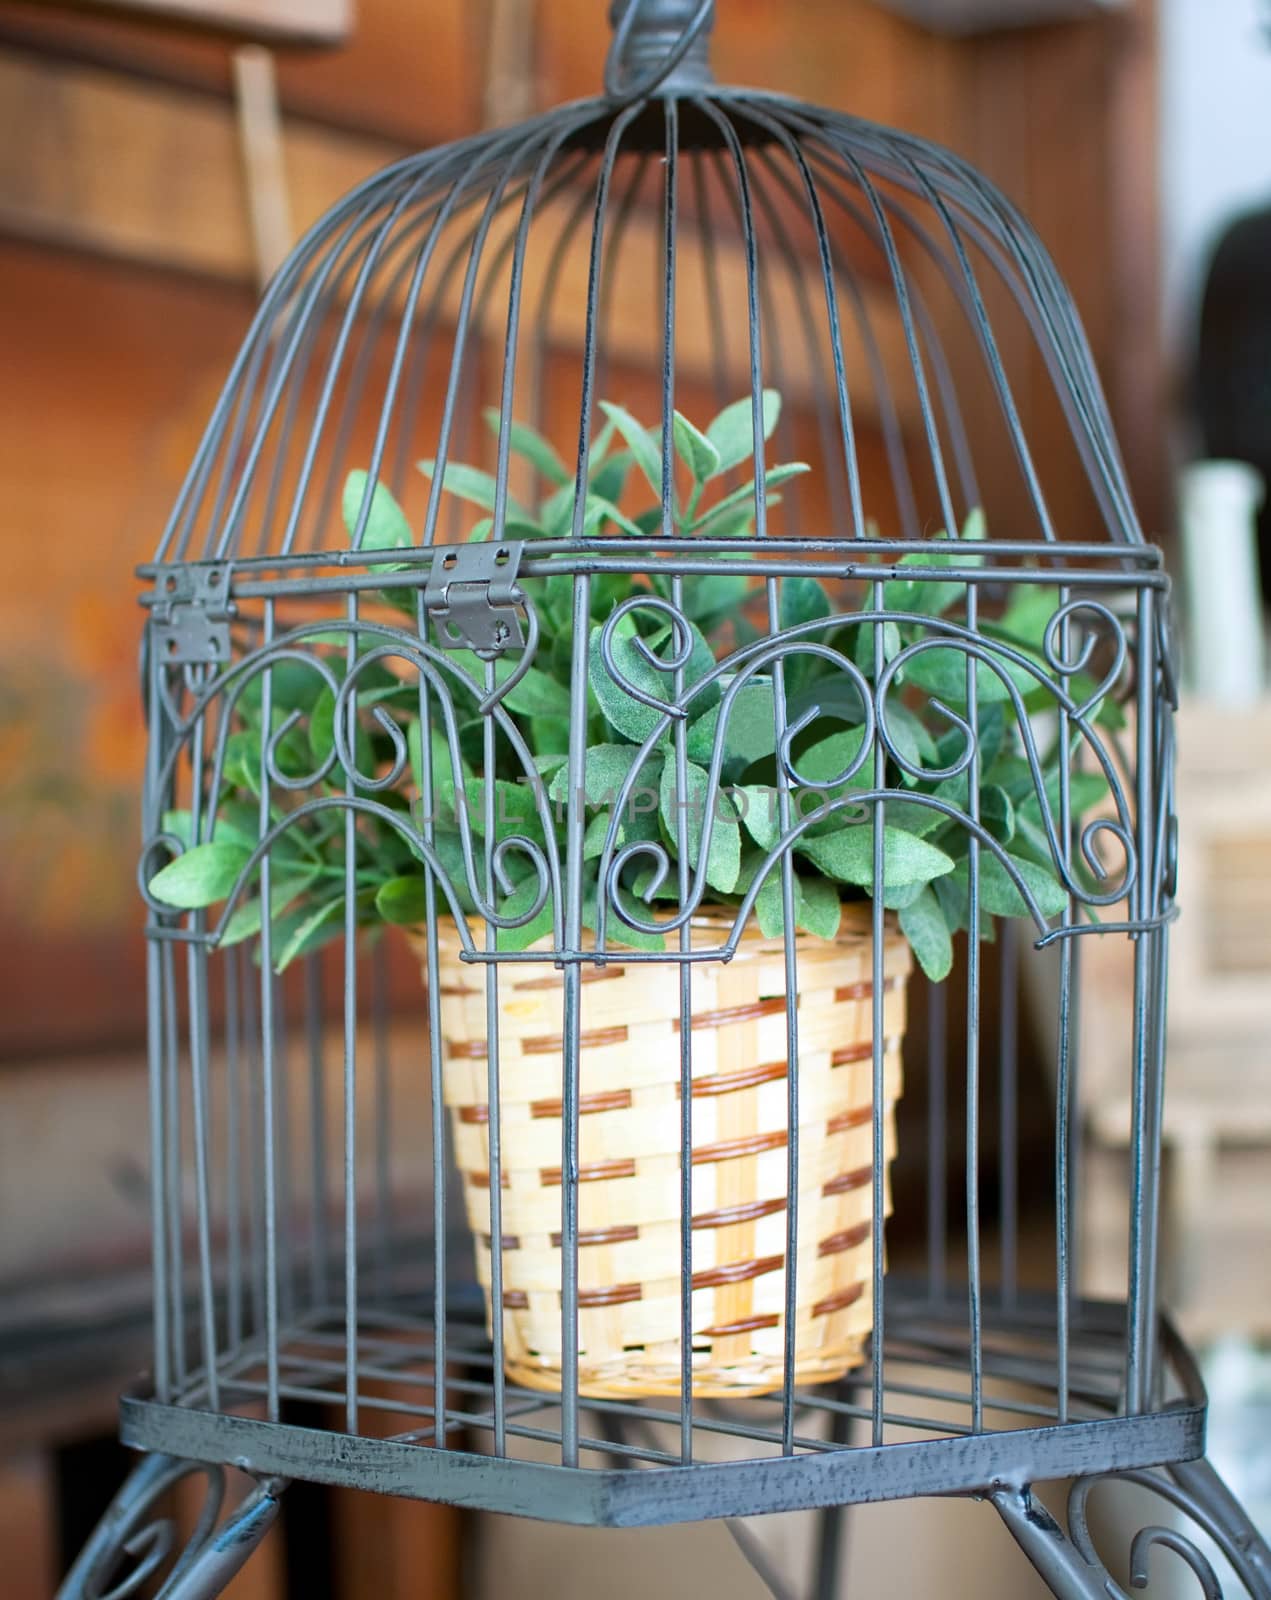 Plant in a birdcage . by LarisaP